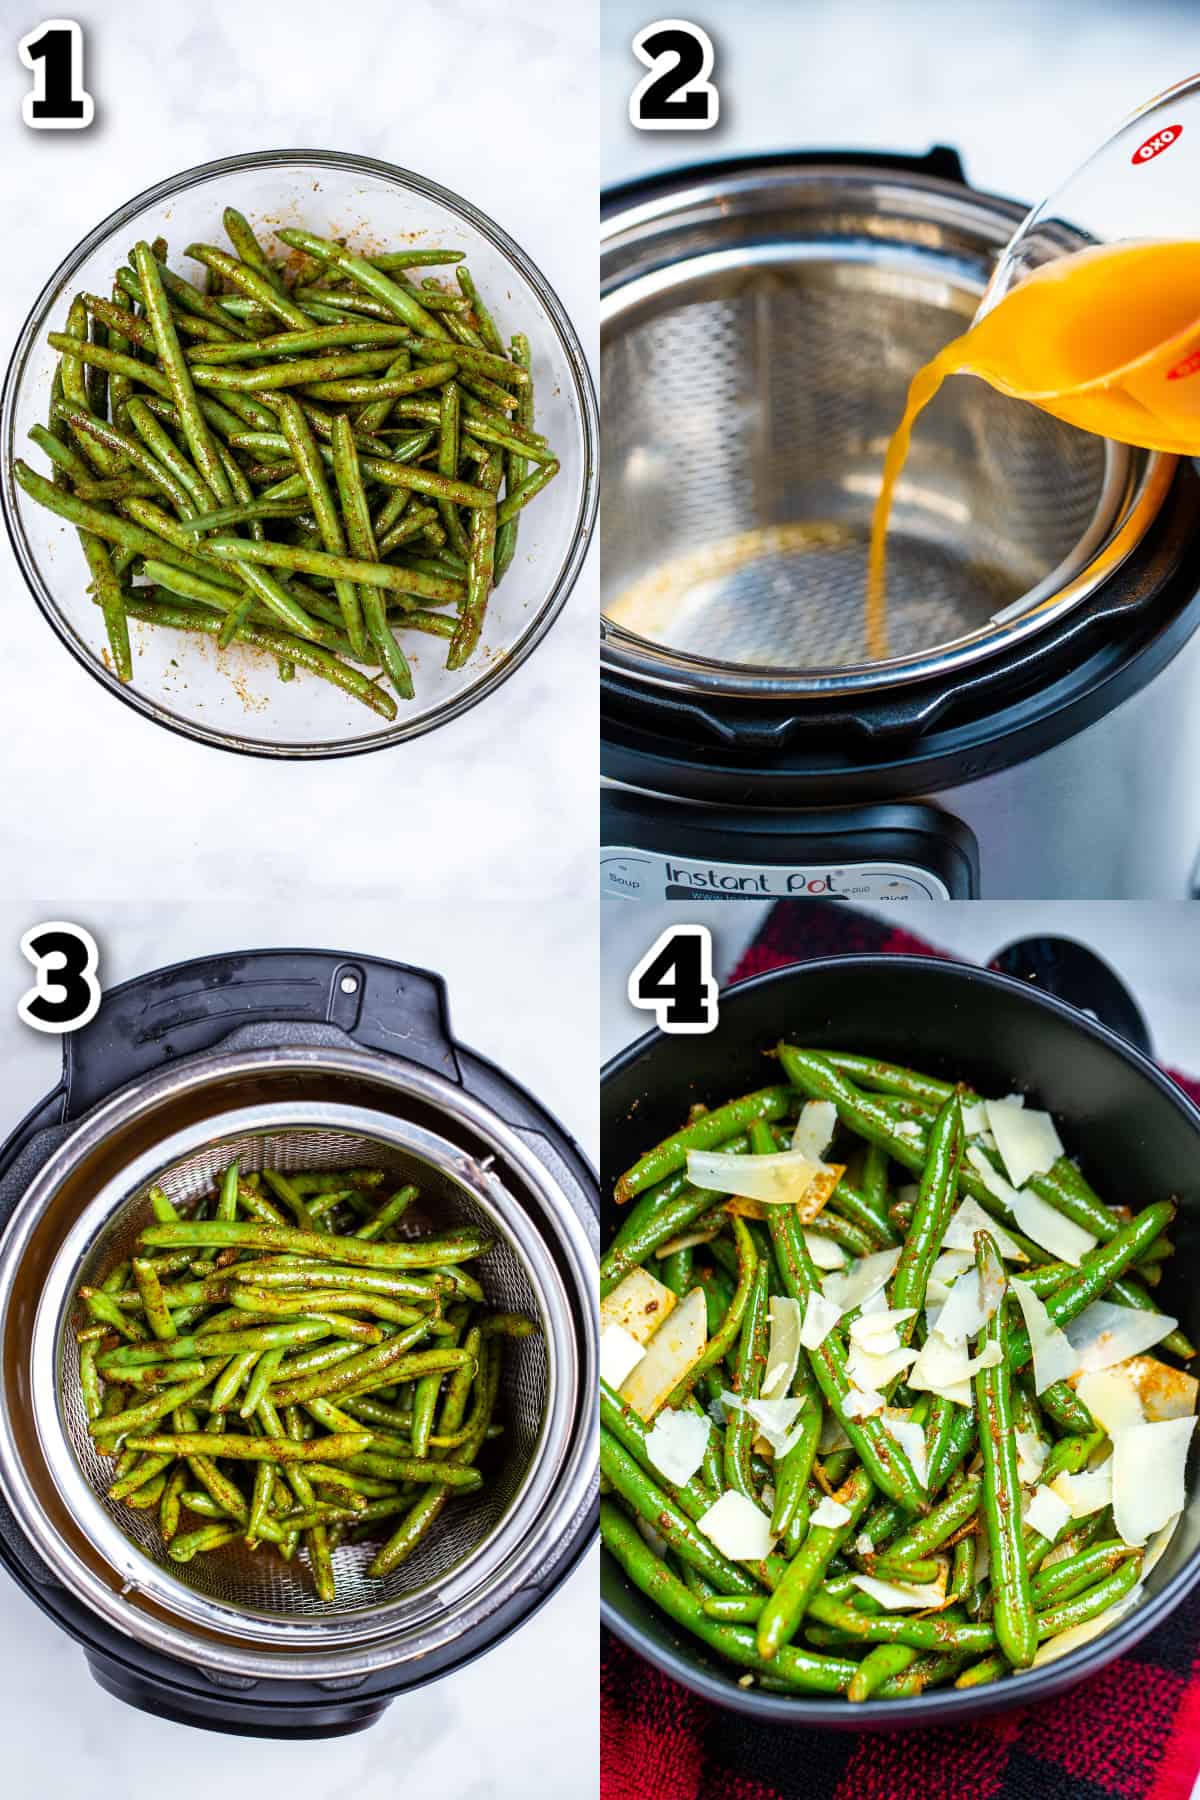 Step by step photos for how to make instant pot green beans.